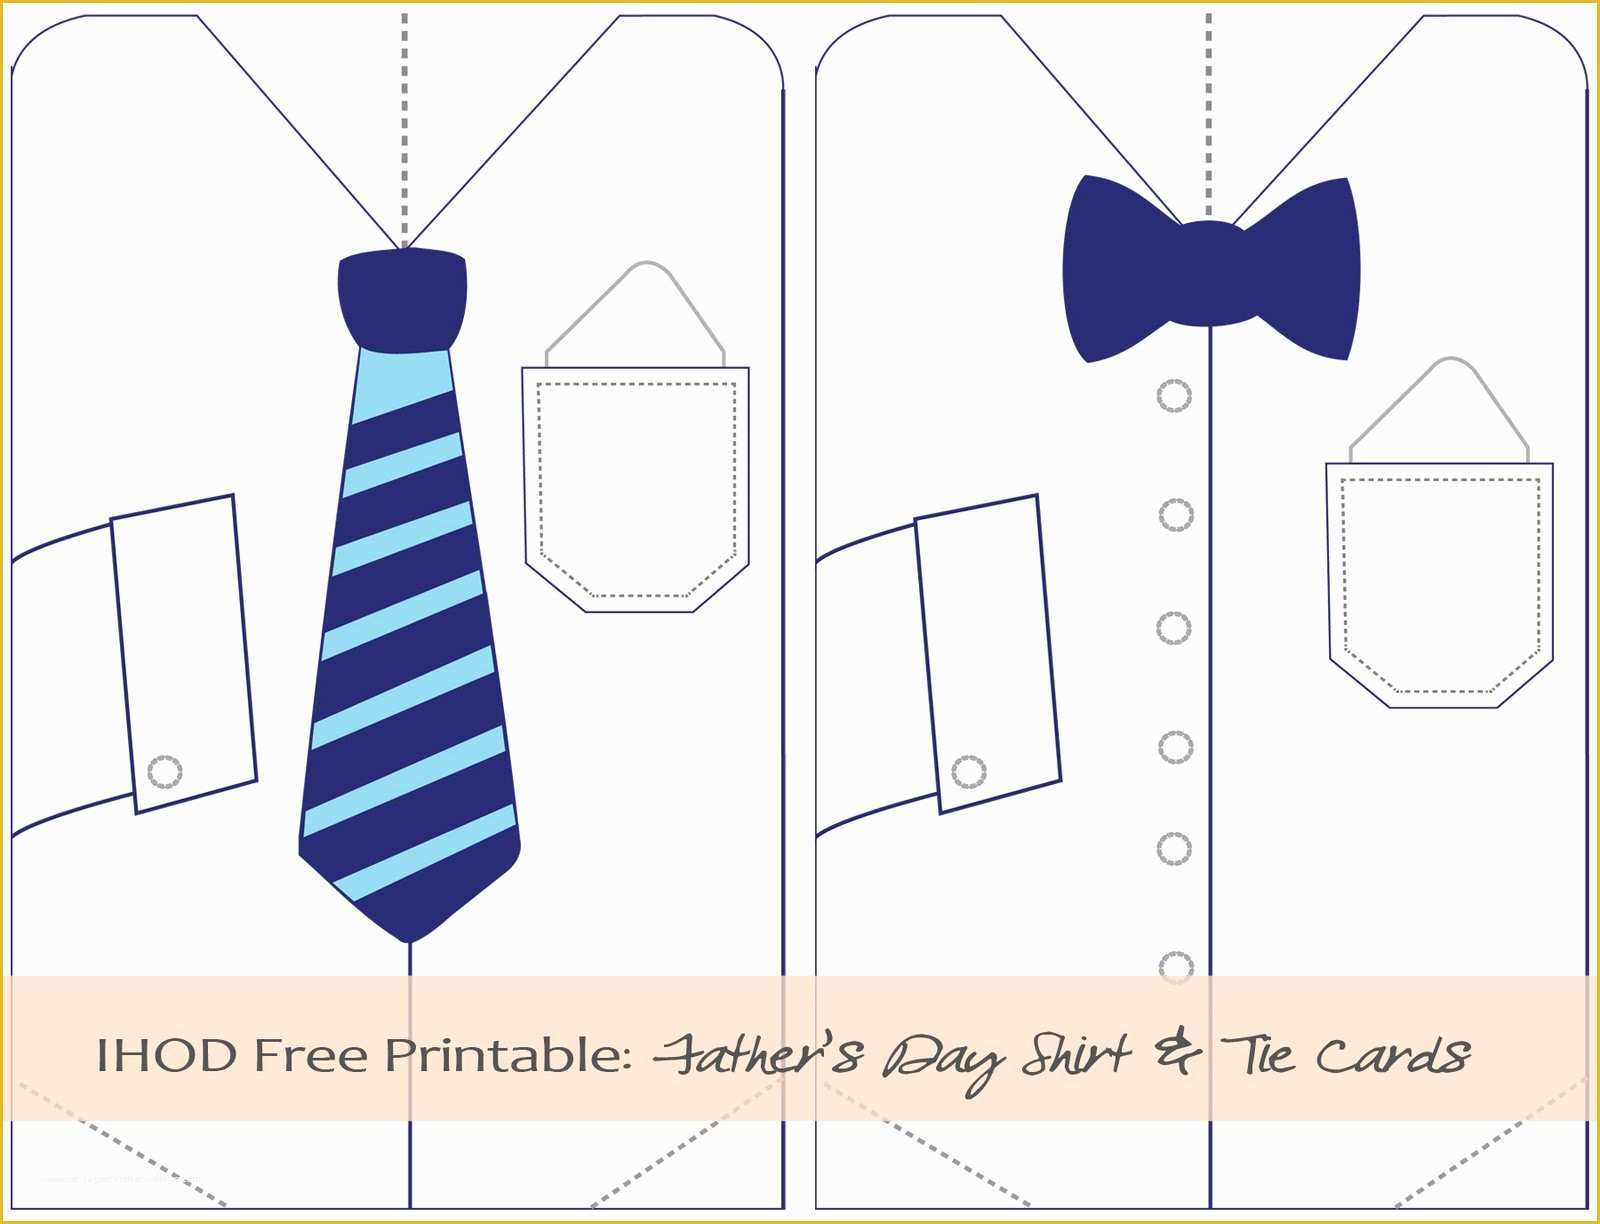 Free Printable Tie Template Of Diy Free Printable Father S Day Shirt & Tie Card